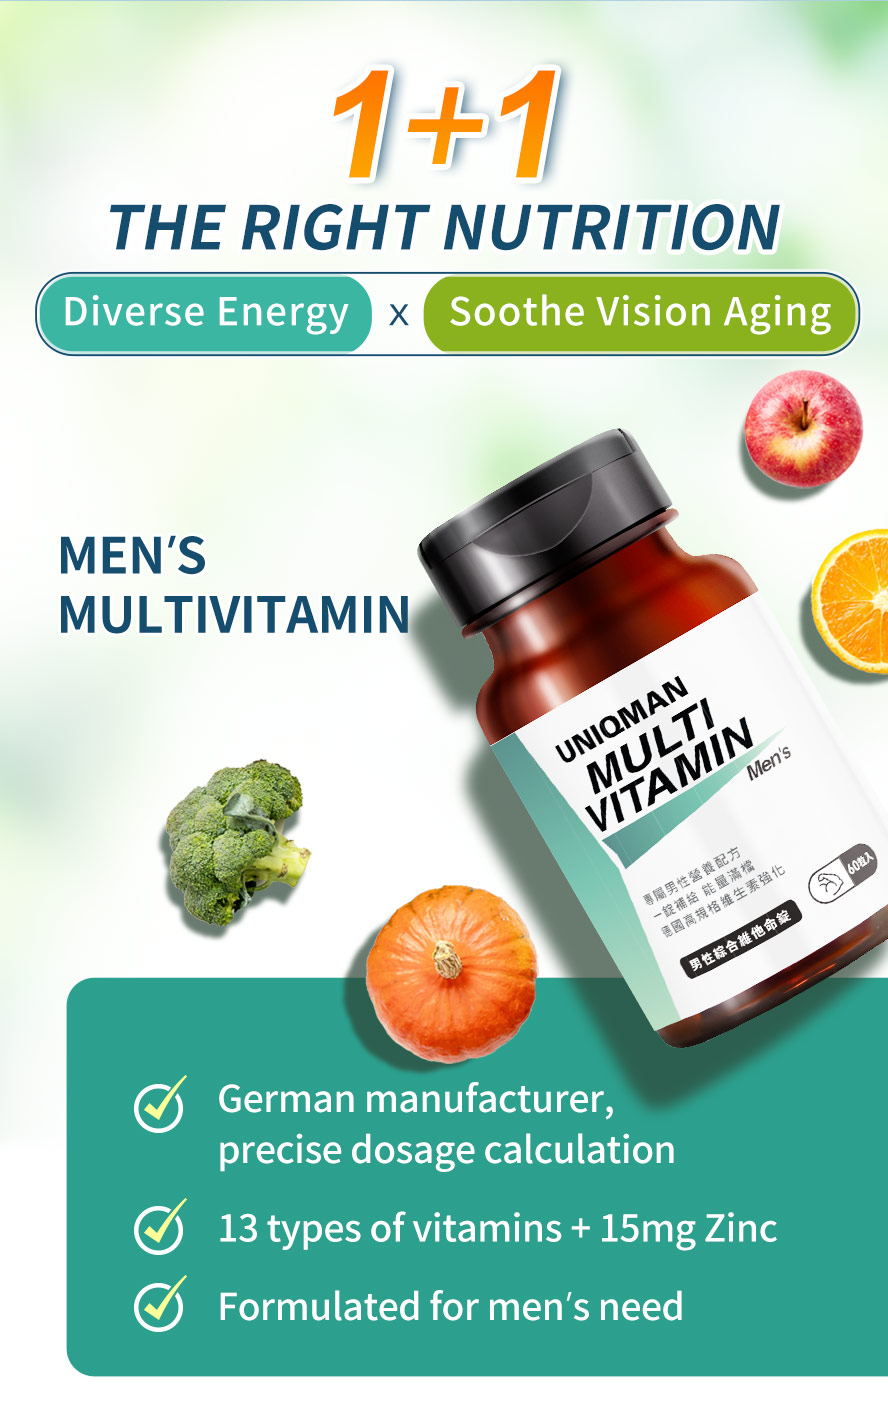 UNIQMAN Men's Mutivitamin has 13 vitamins and zinc to diverse energy and maintain health.